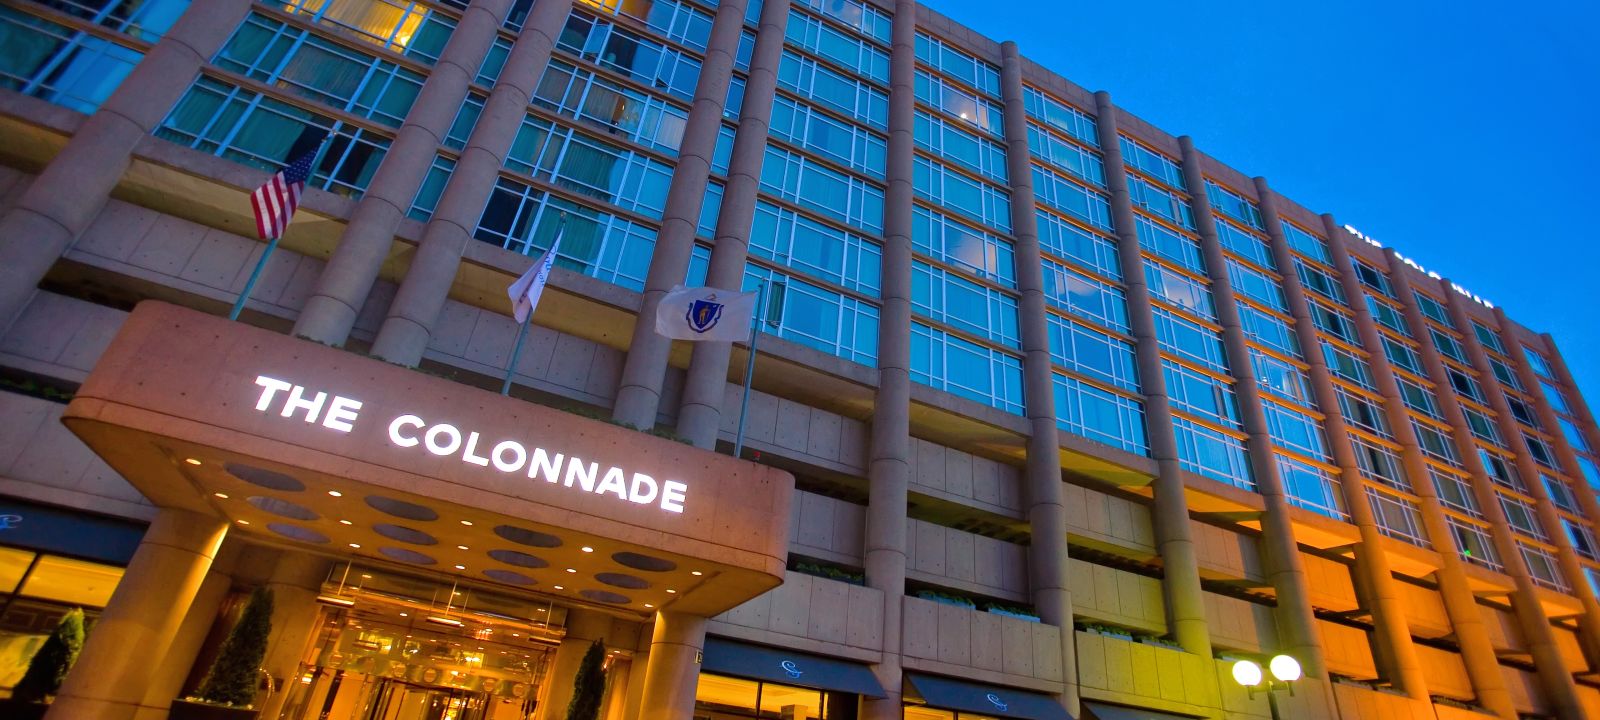 The colonnade hotel exterior